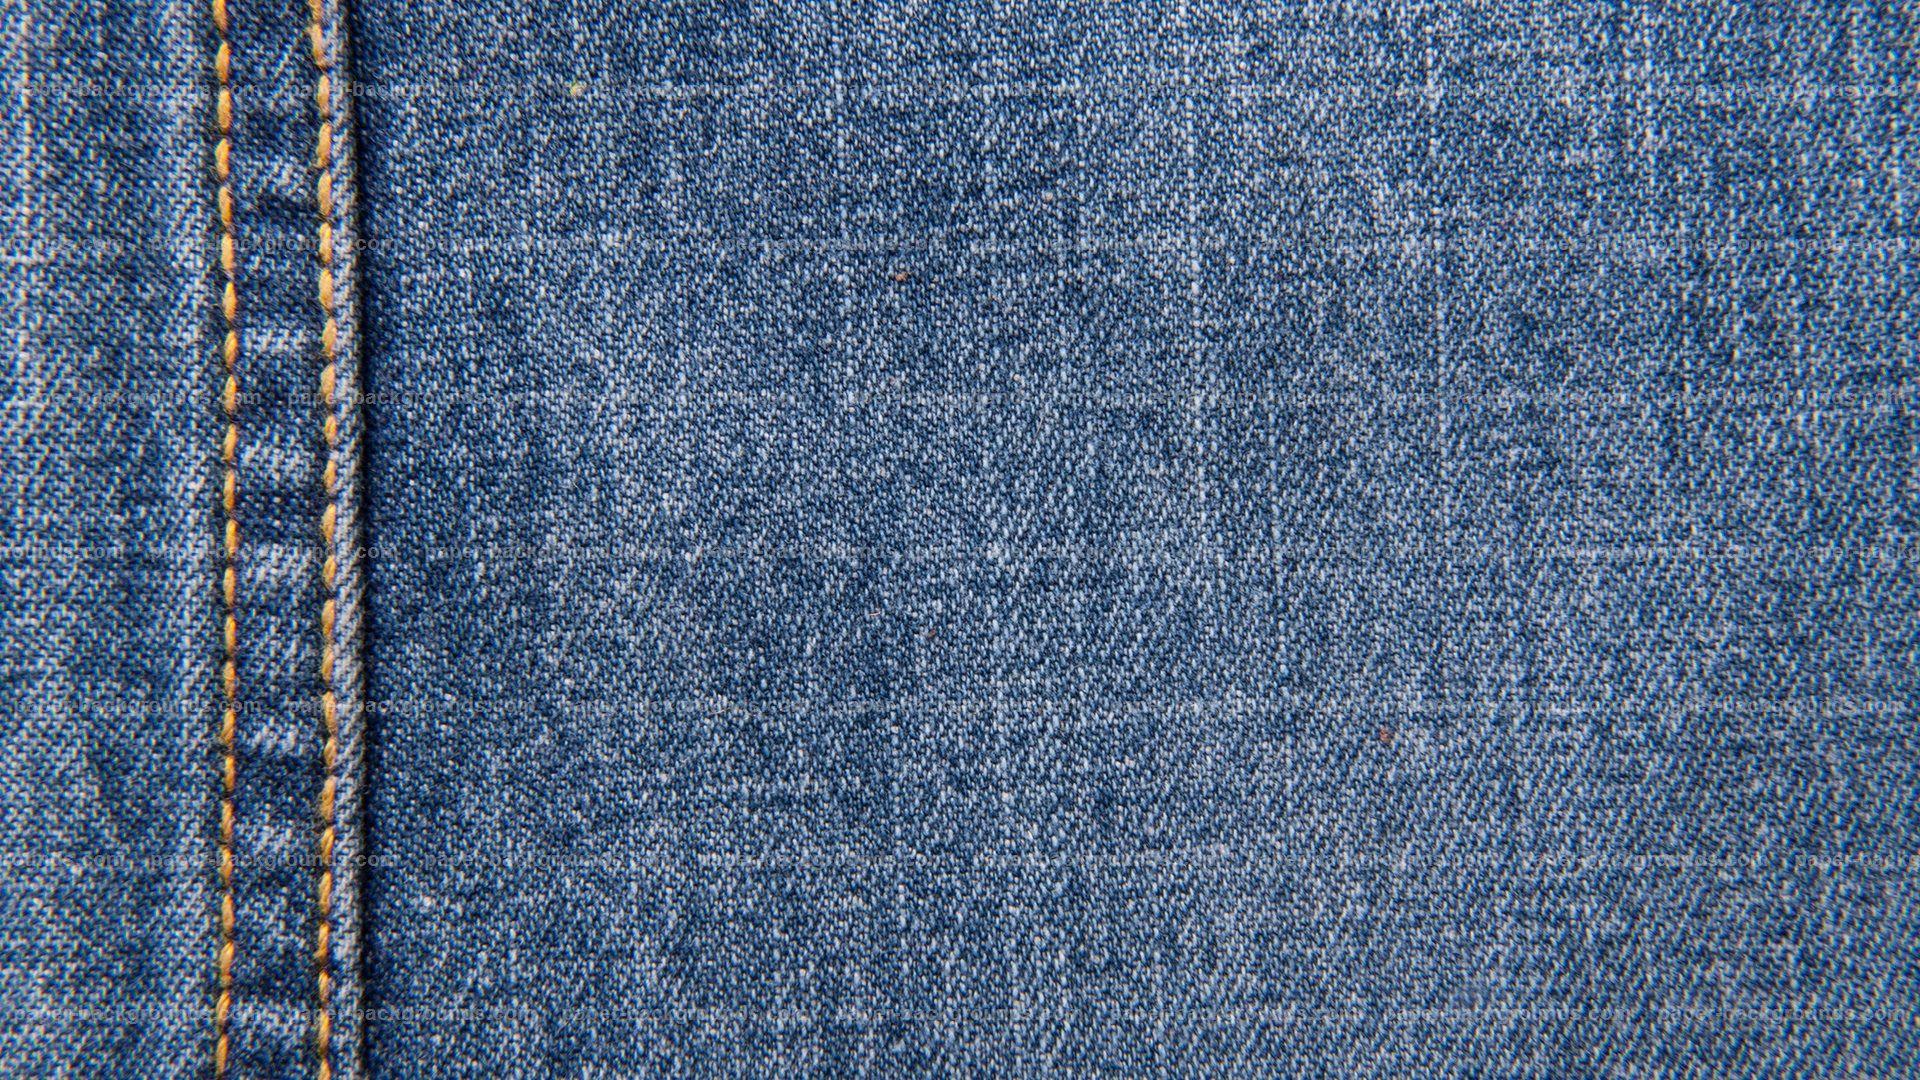 10 Types of Denim Washes and How to Wear Them | thredUP Blog